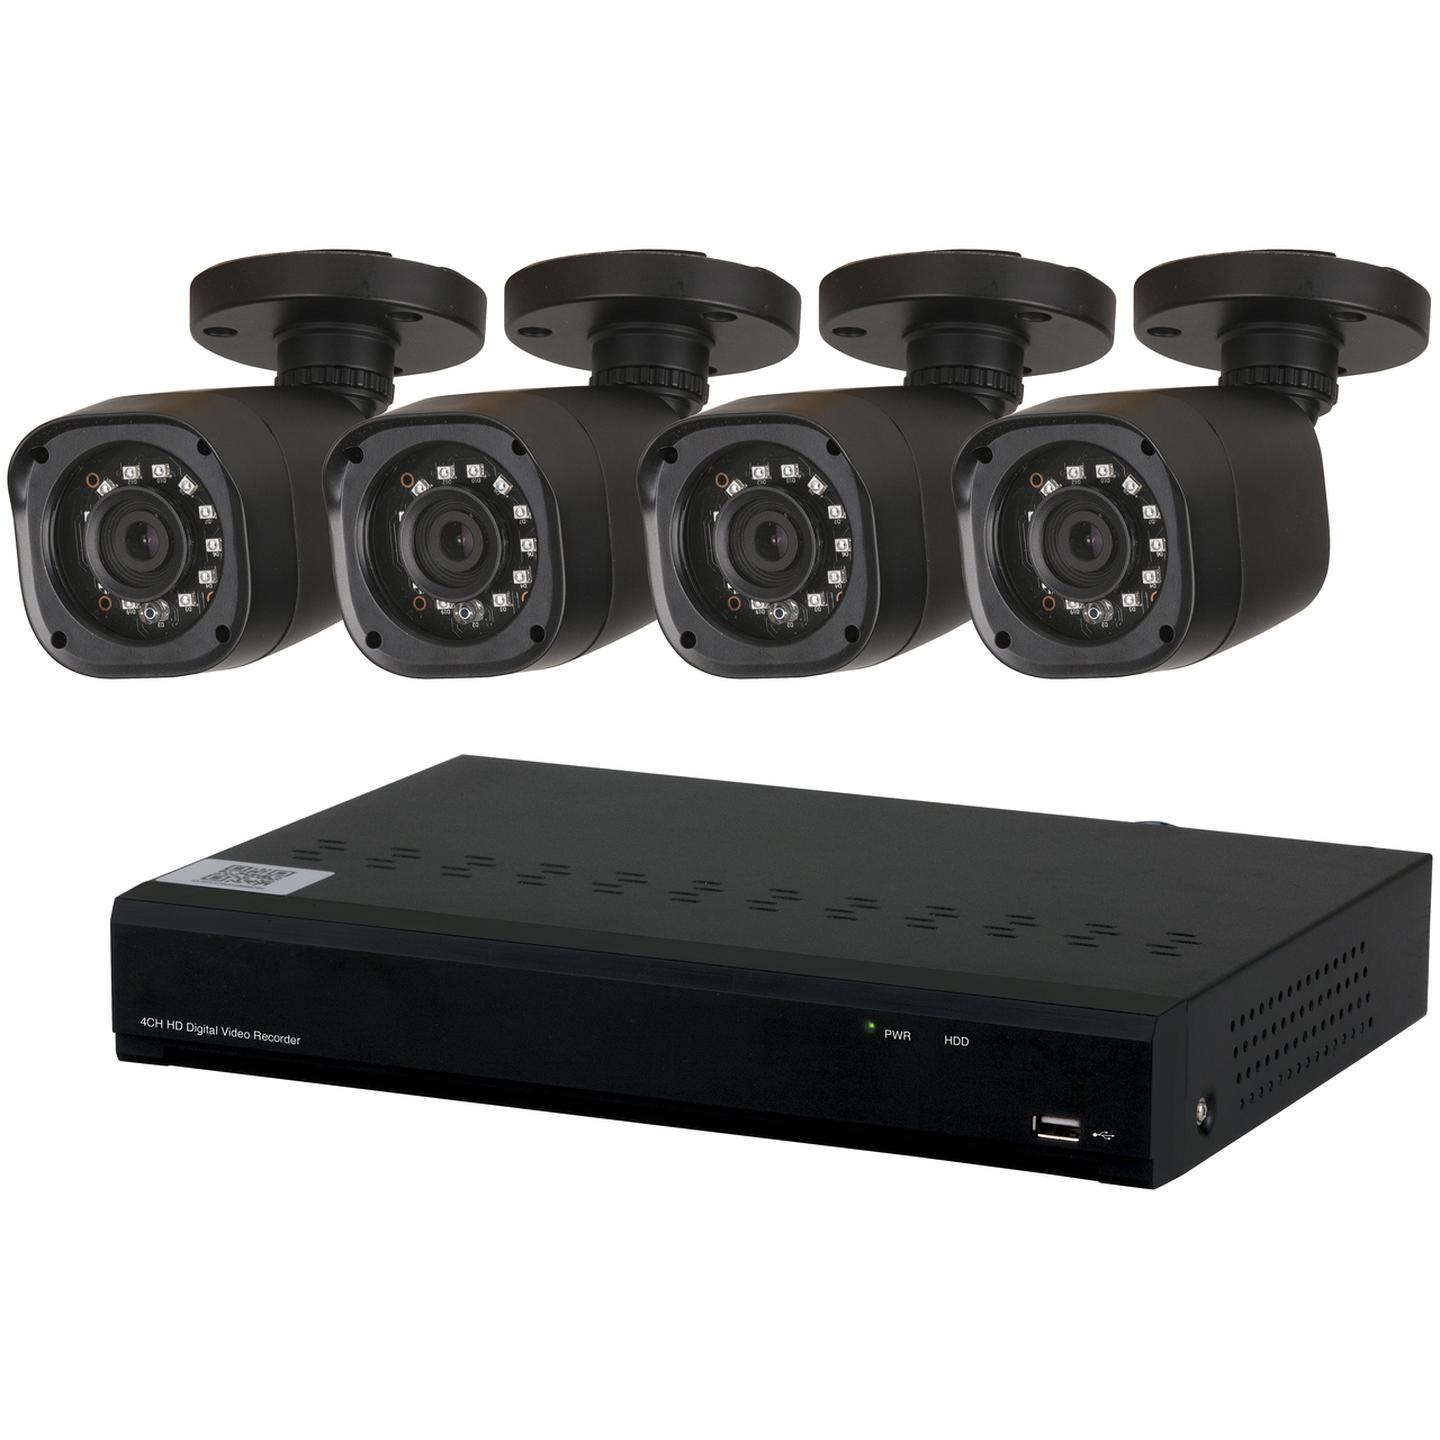 4 Channel 720p AHD DVR Kit with 4 x 720p Cameras